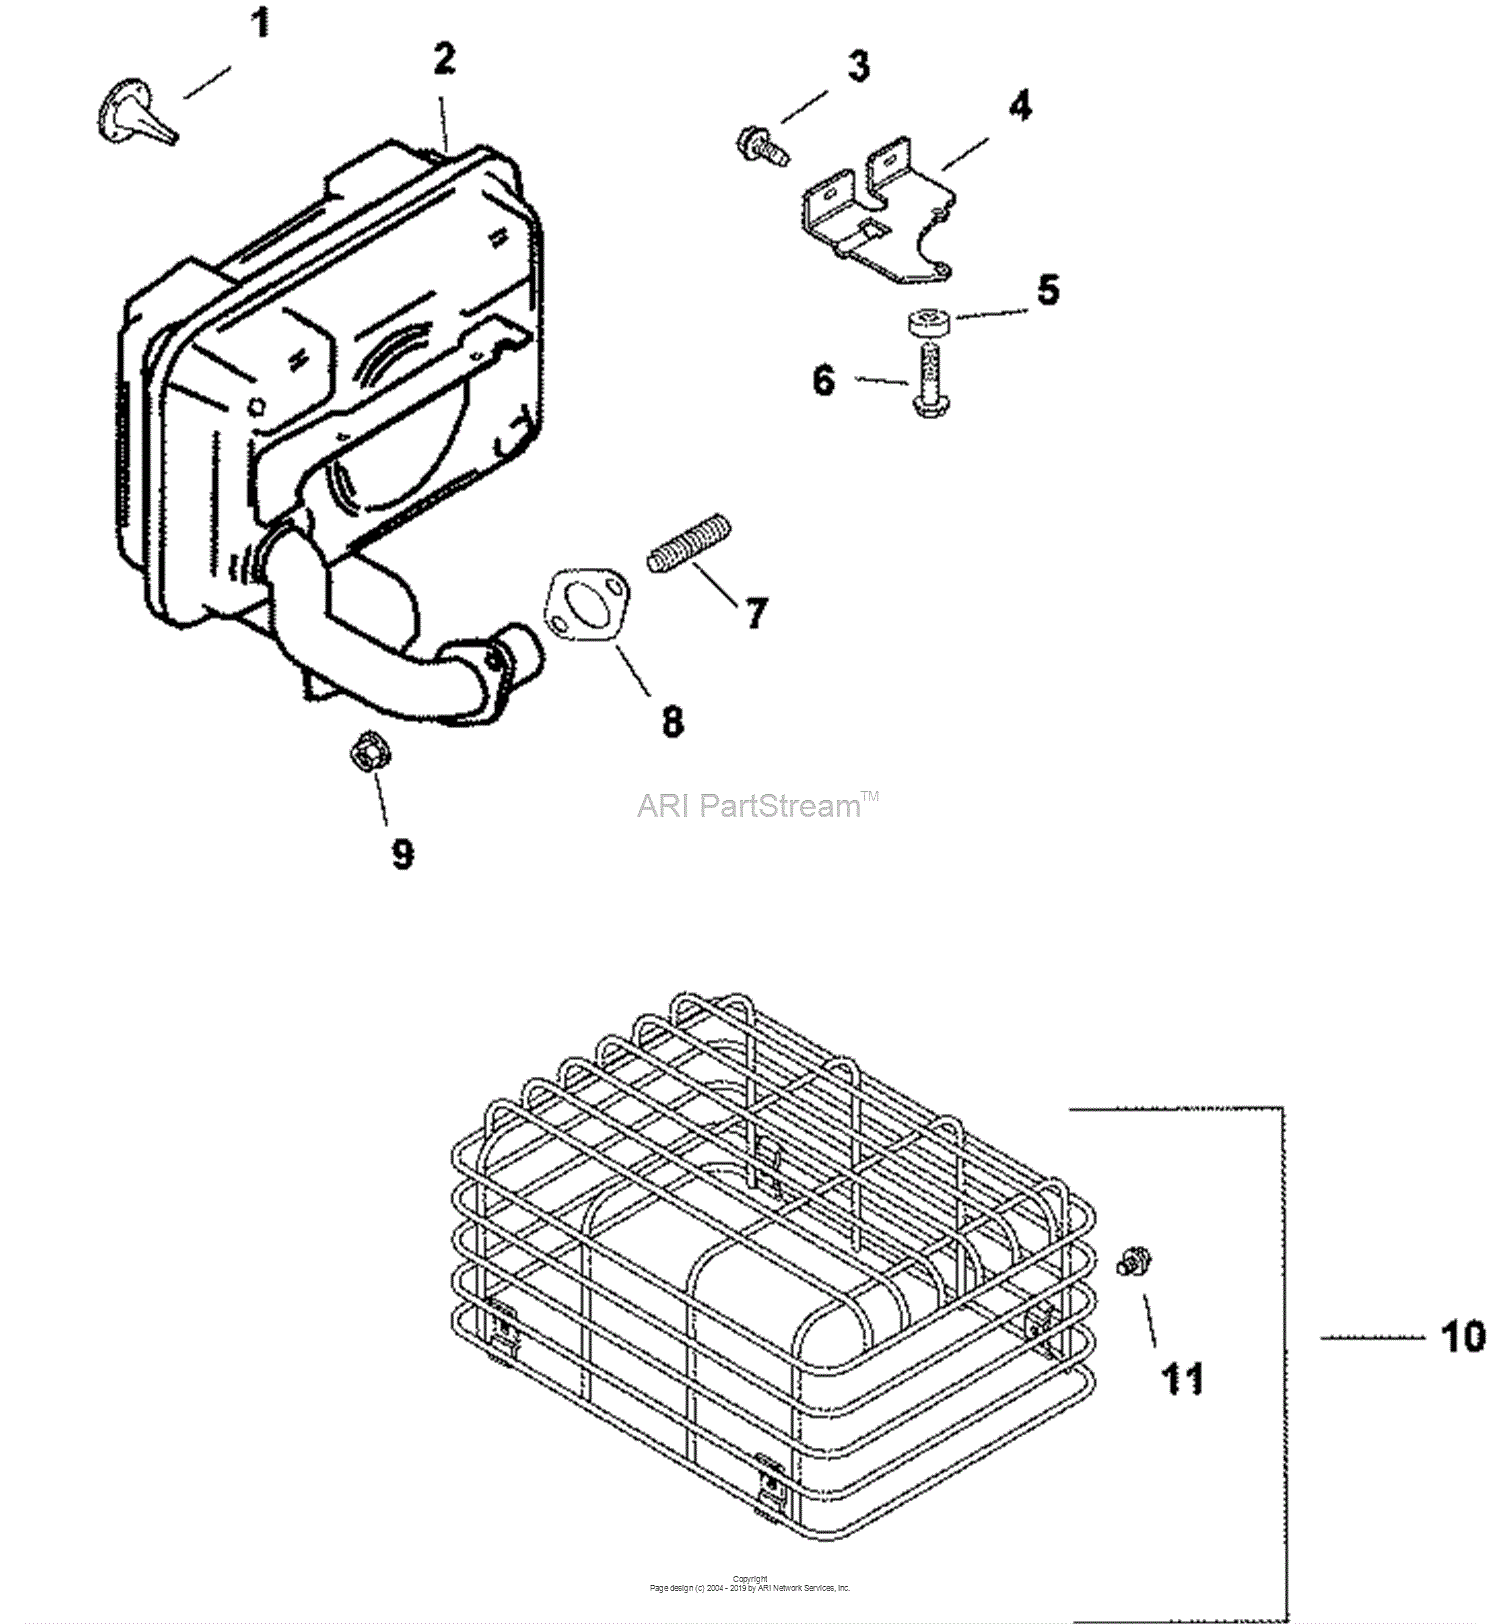 Kohler CH15-44512 WOODMIZER 15 HP (11.2 kW) Parts Diagram for Exhaust